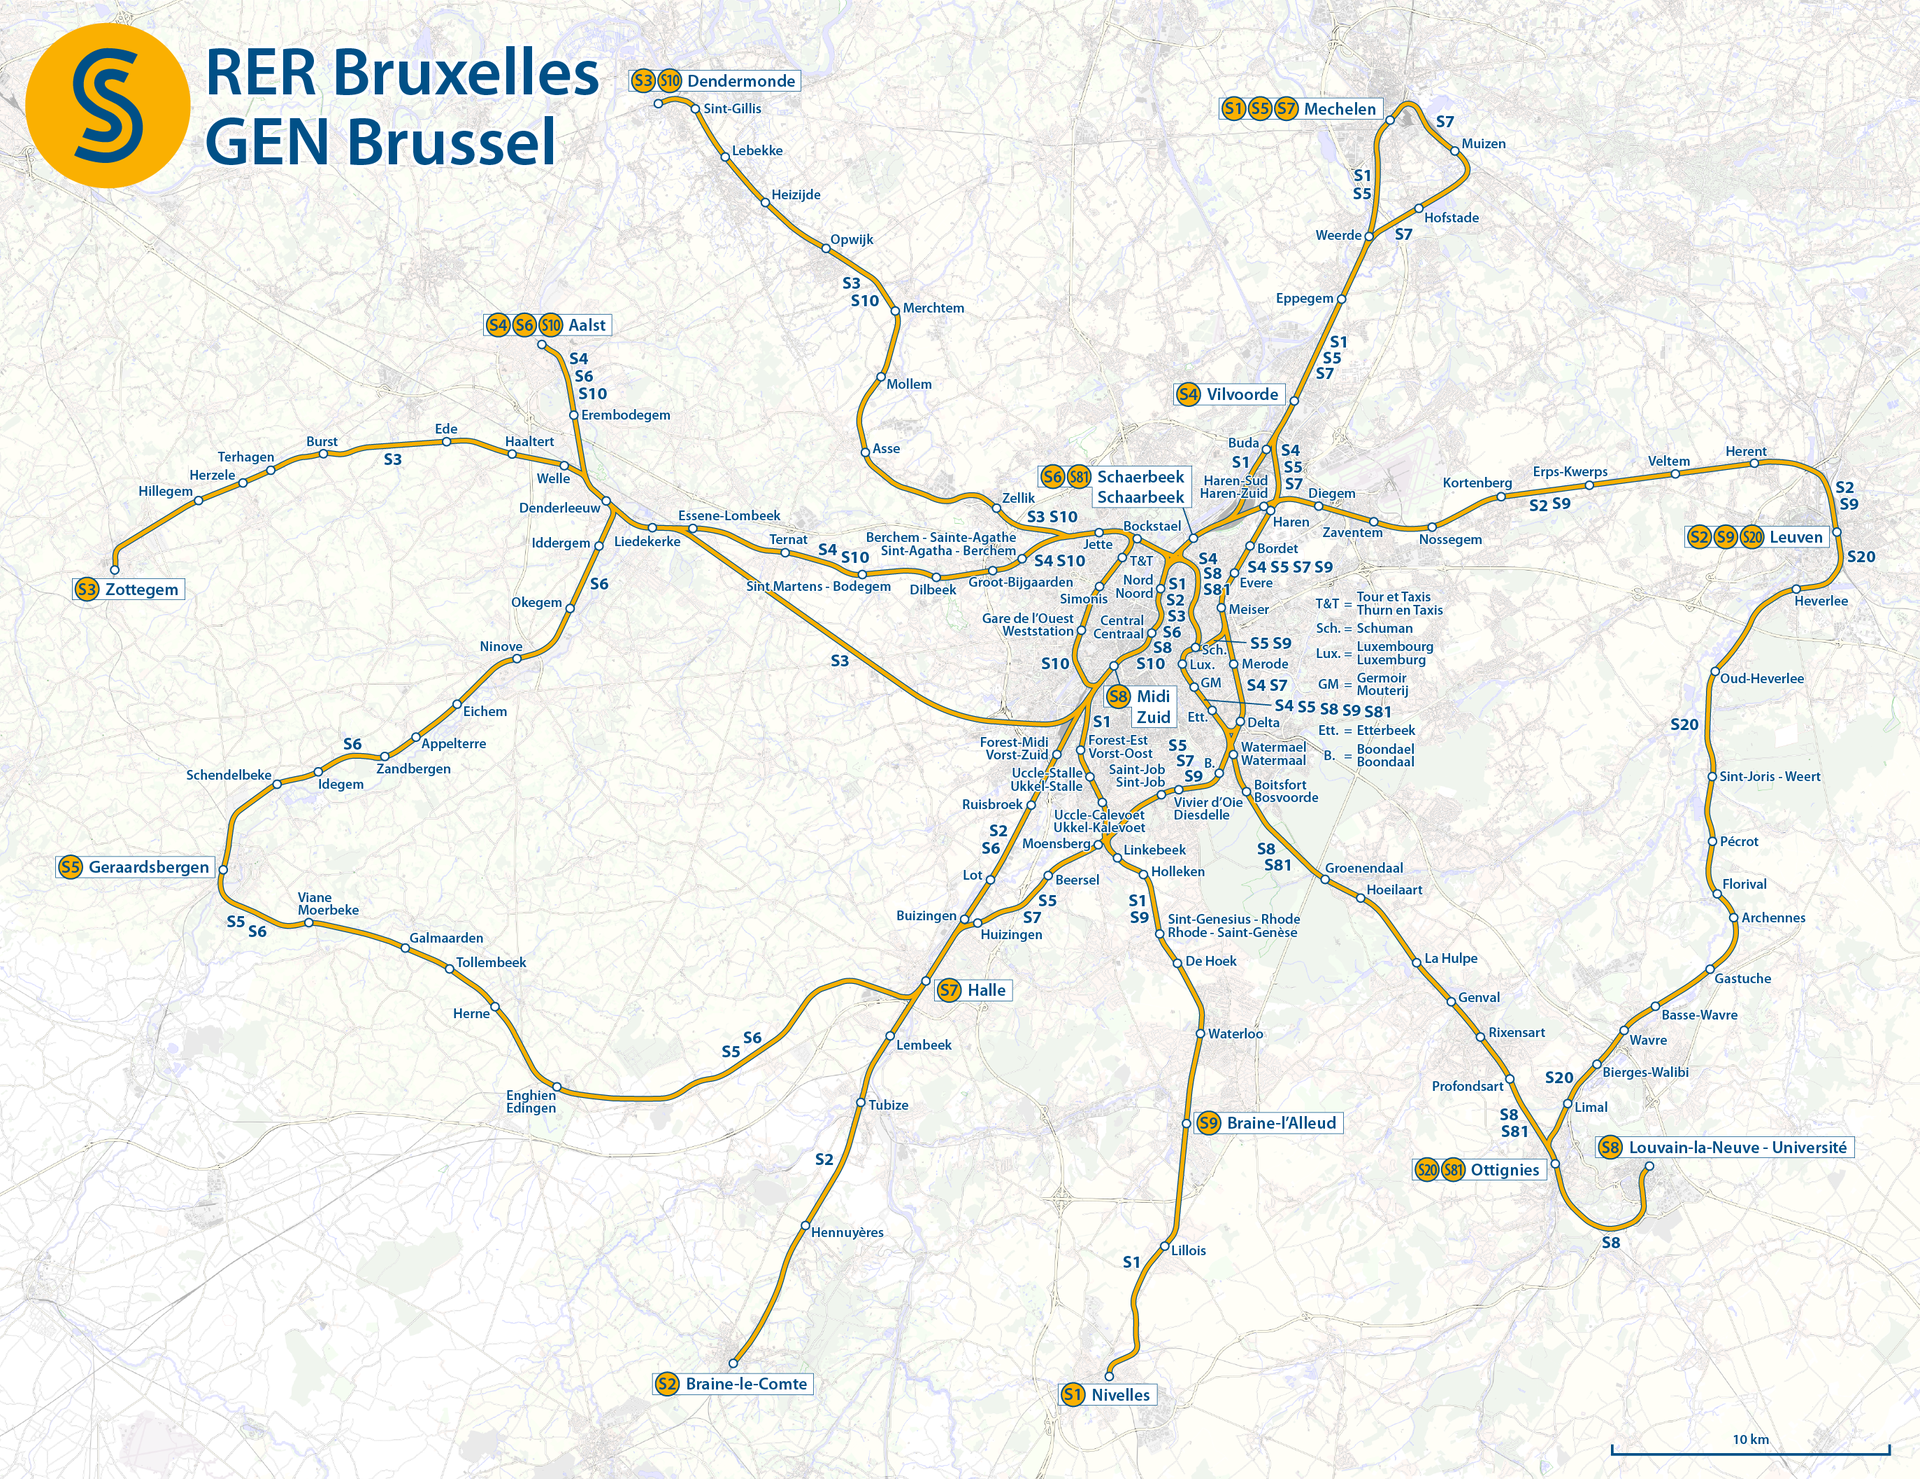 The Rer project